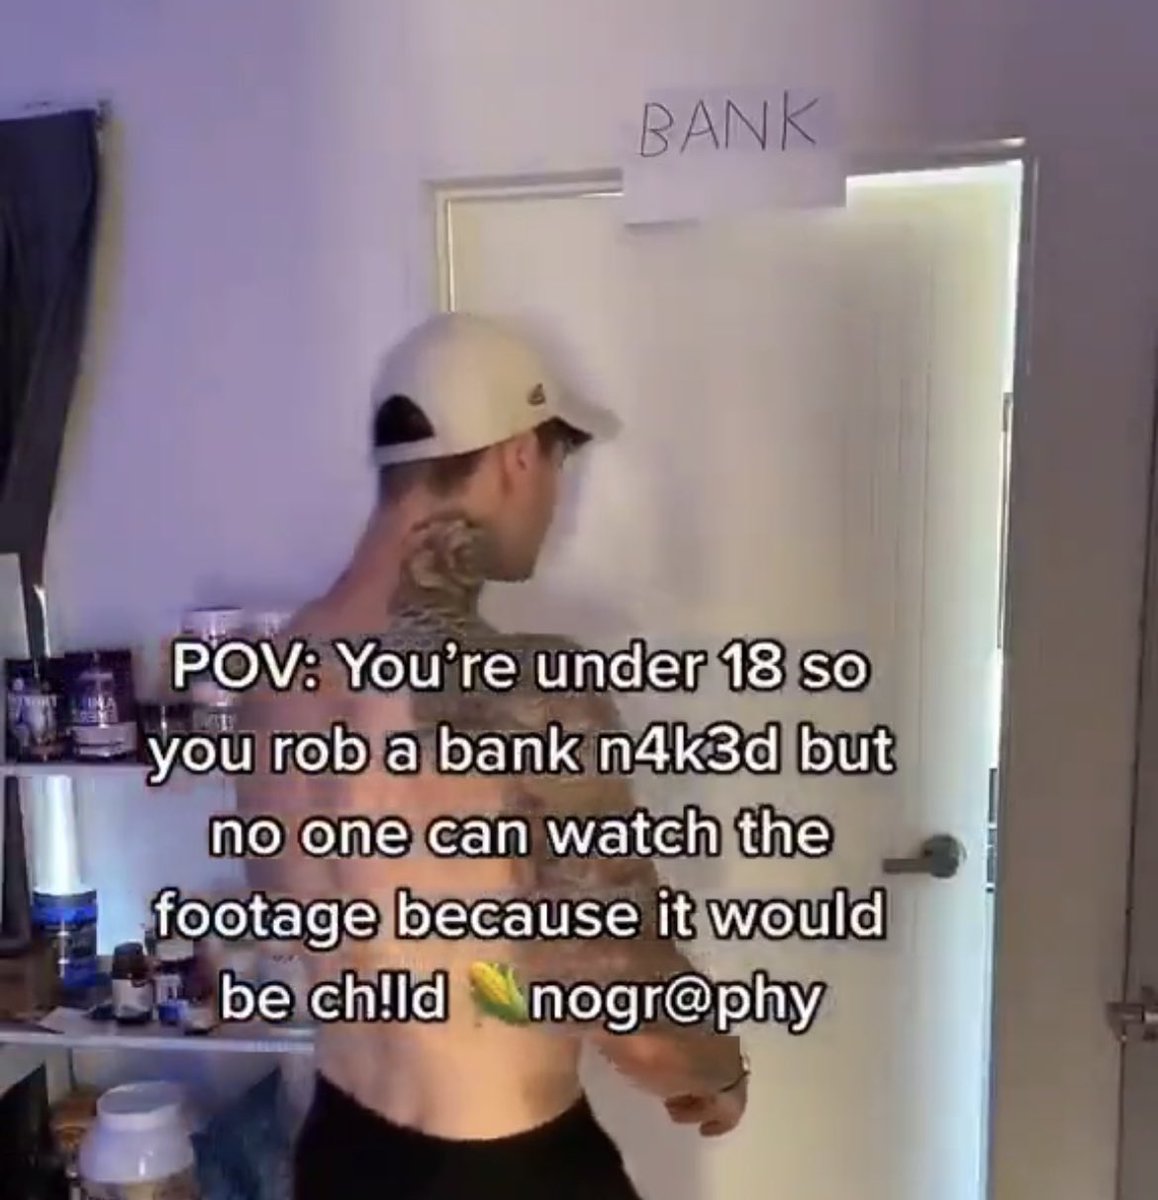 wild tiktok screenshots - shoulder - Bank Pov You're under 18 so you rob a bank n4k3d but no one can watch the footage because it would be ch!ldnogr